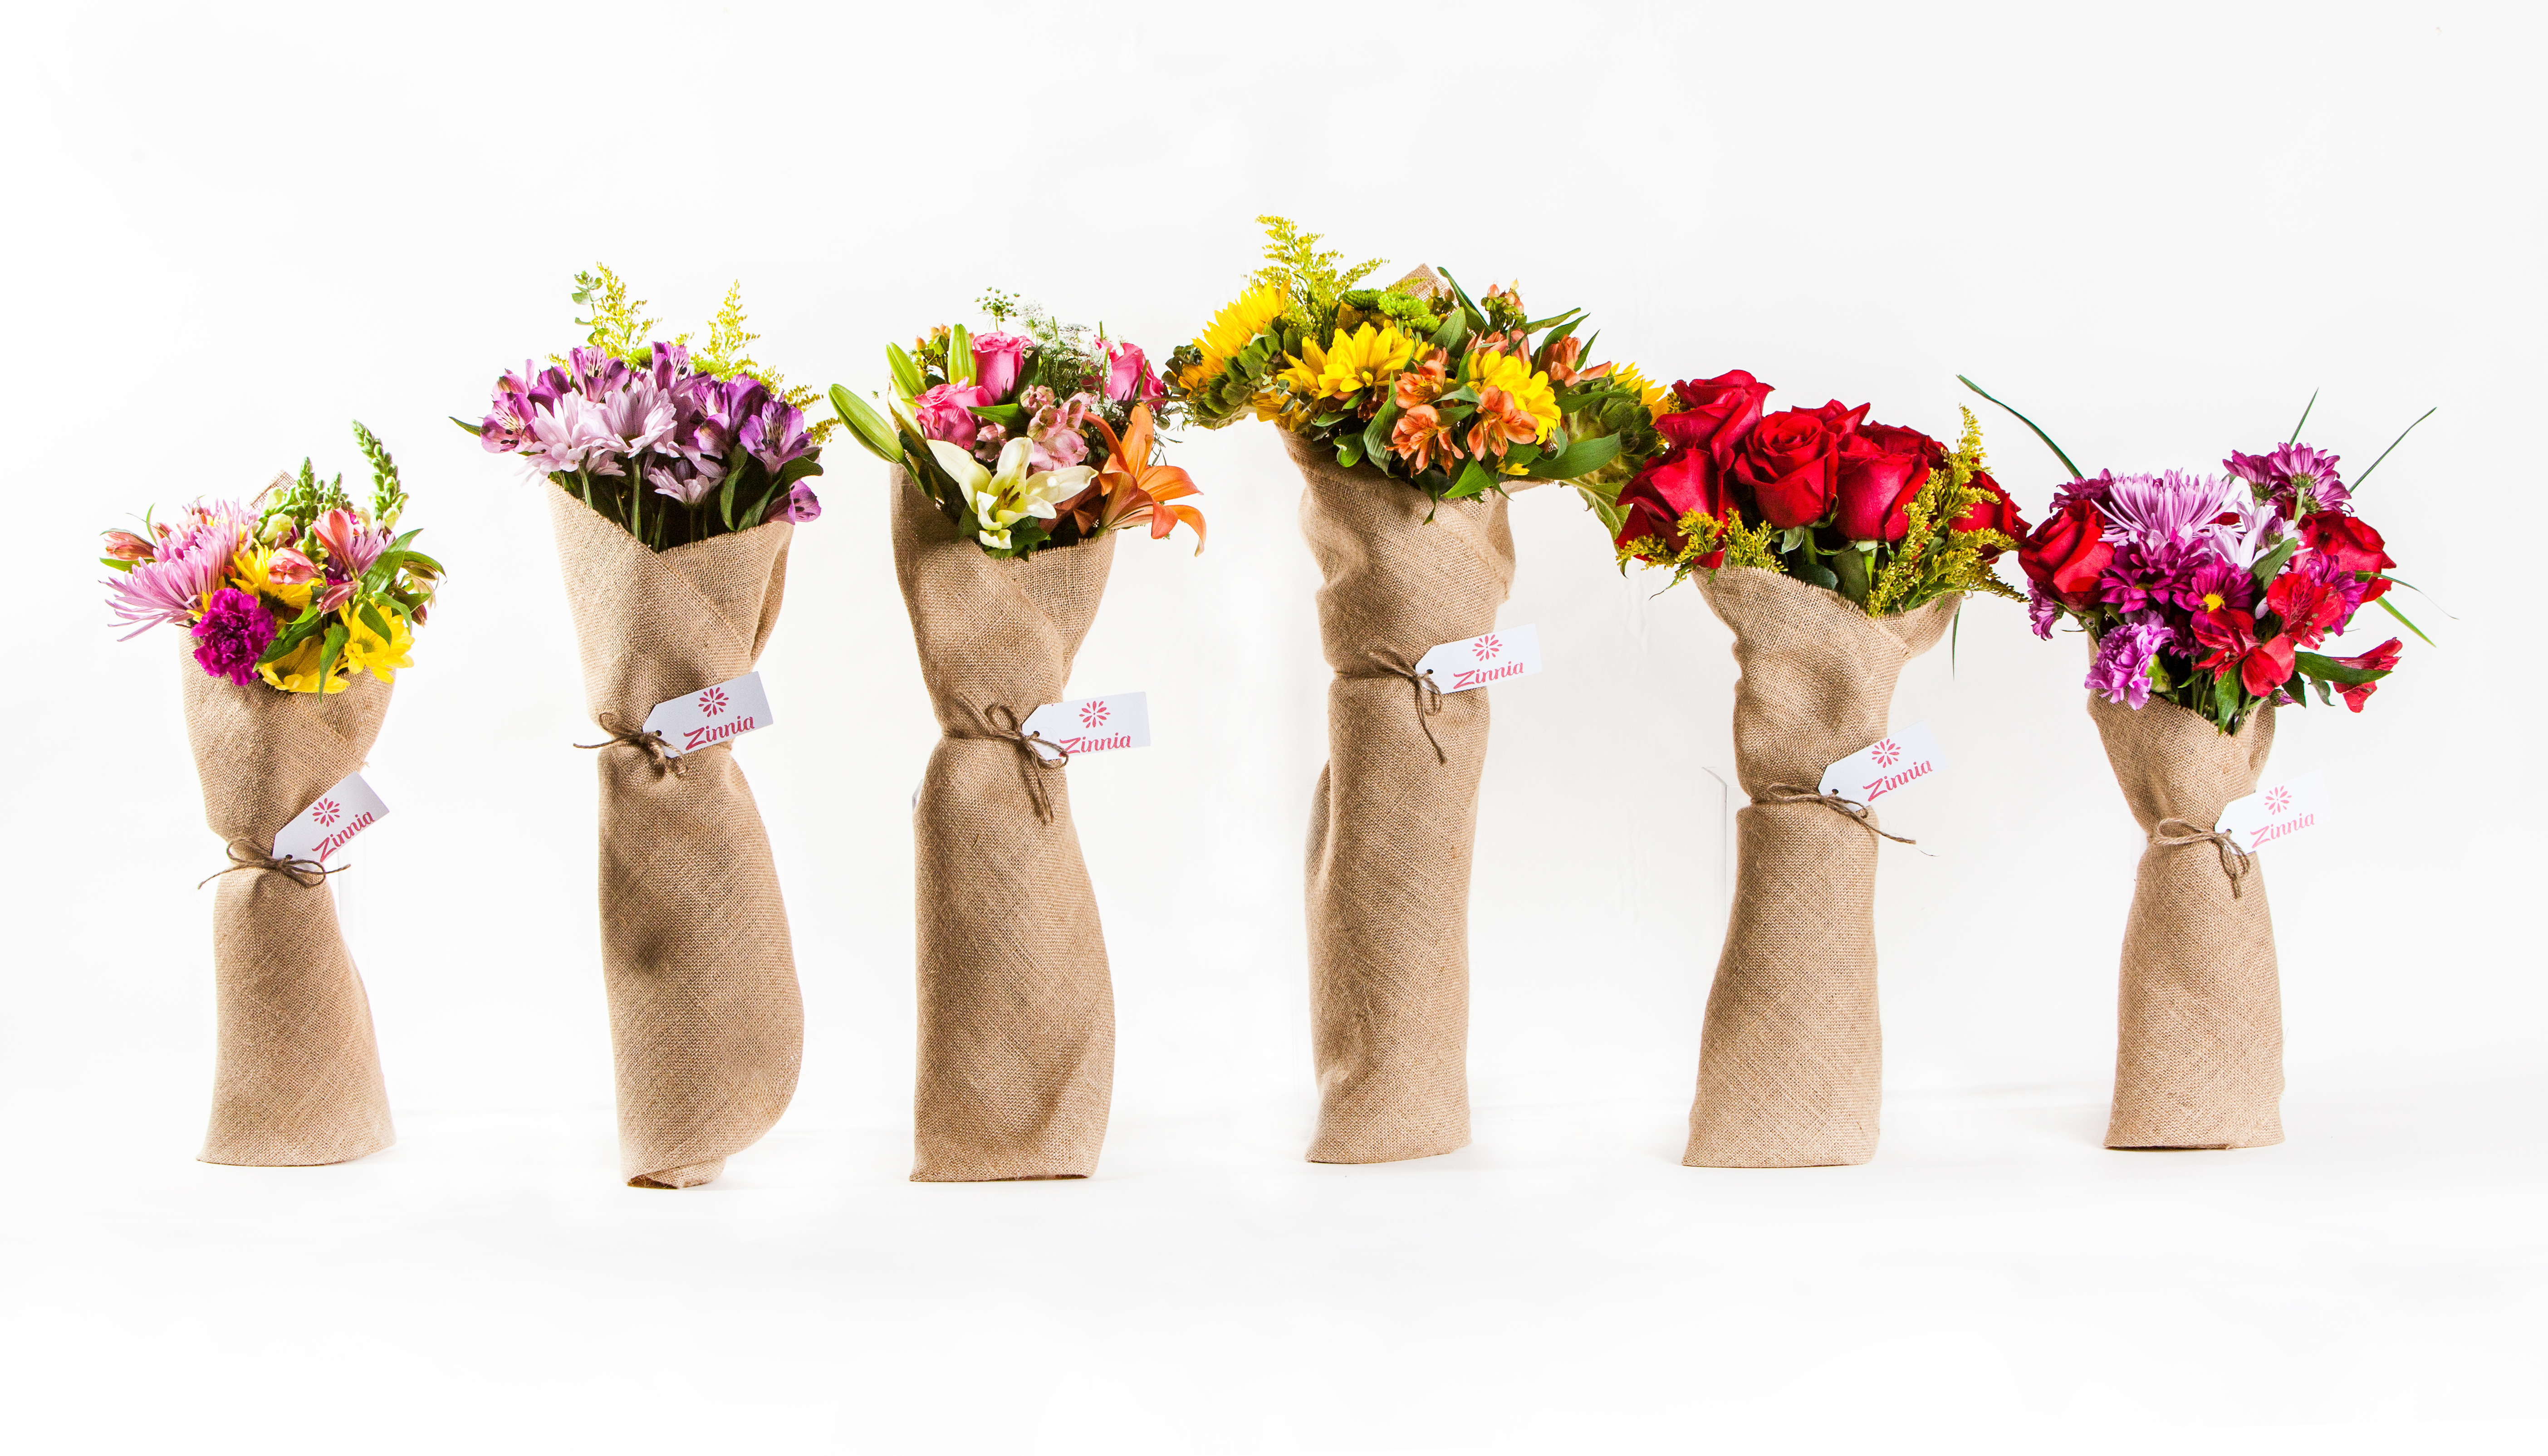 Zinnia makes buying flowers online easy and affordable